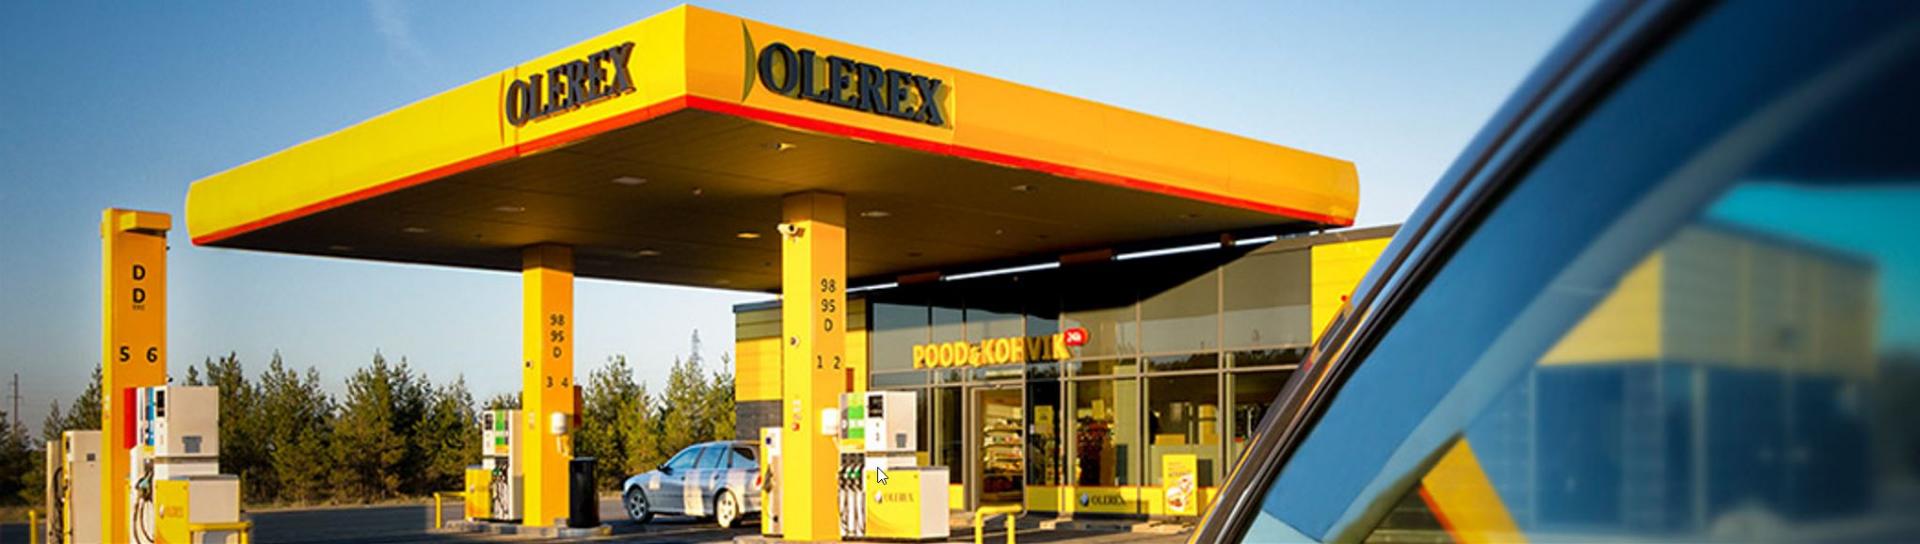 AS Olerex is an Estonian fuel company founded in 1994, whose sales network already includes more than 95 full service stations and express gas stations across Estonia.